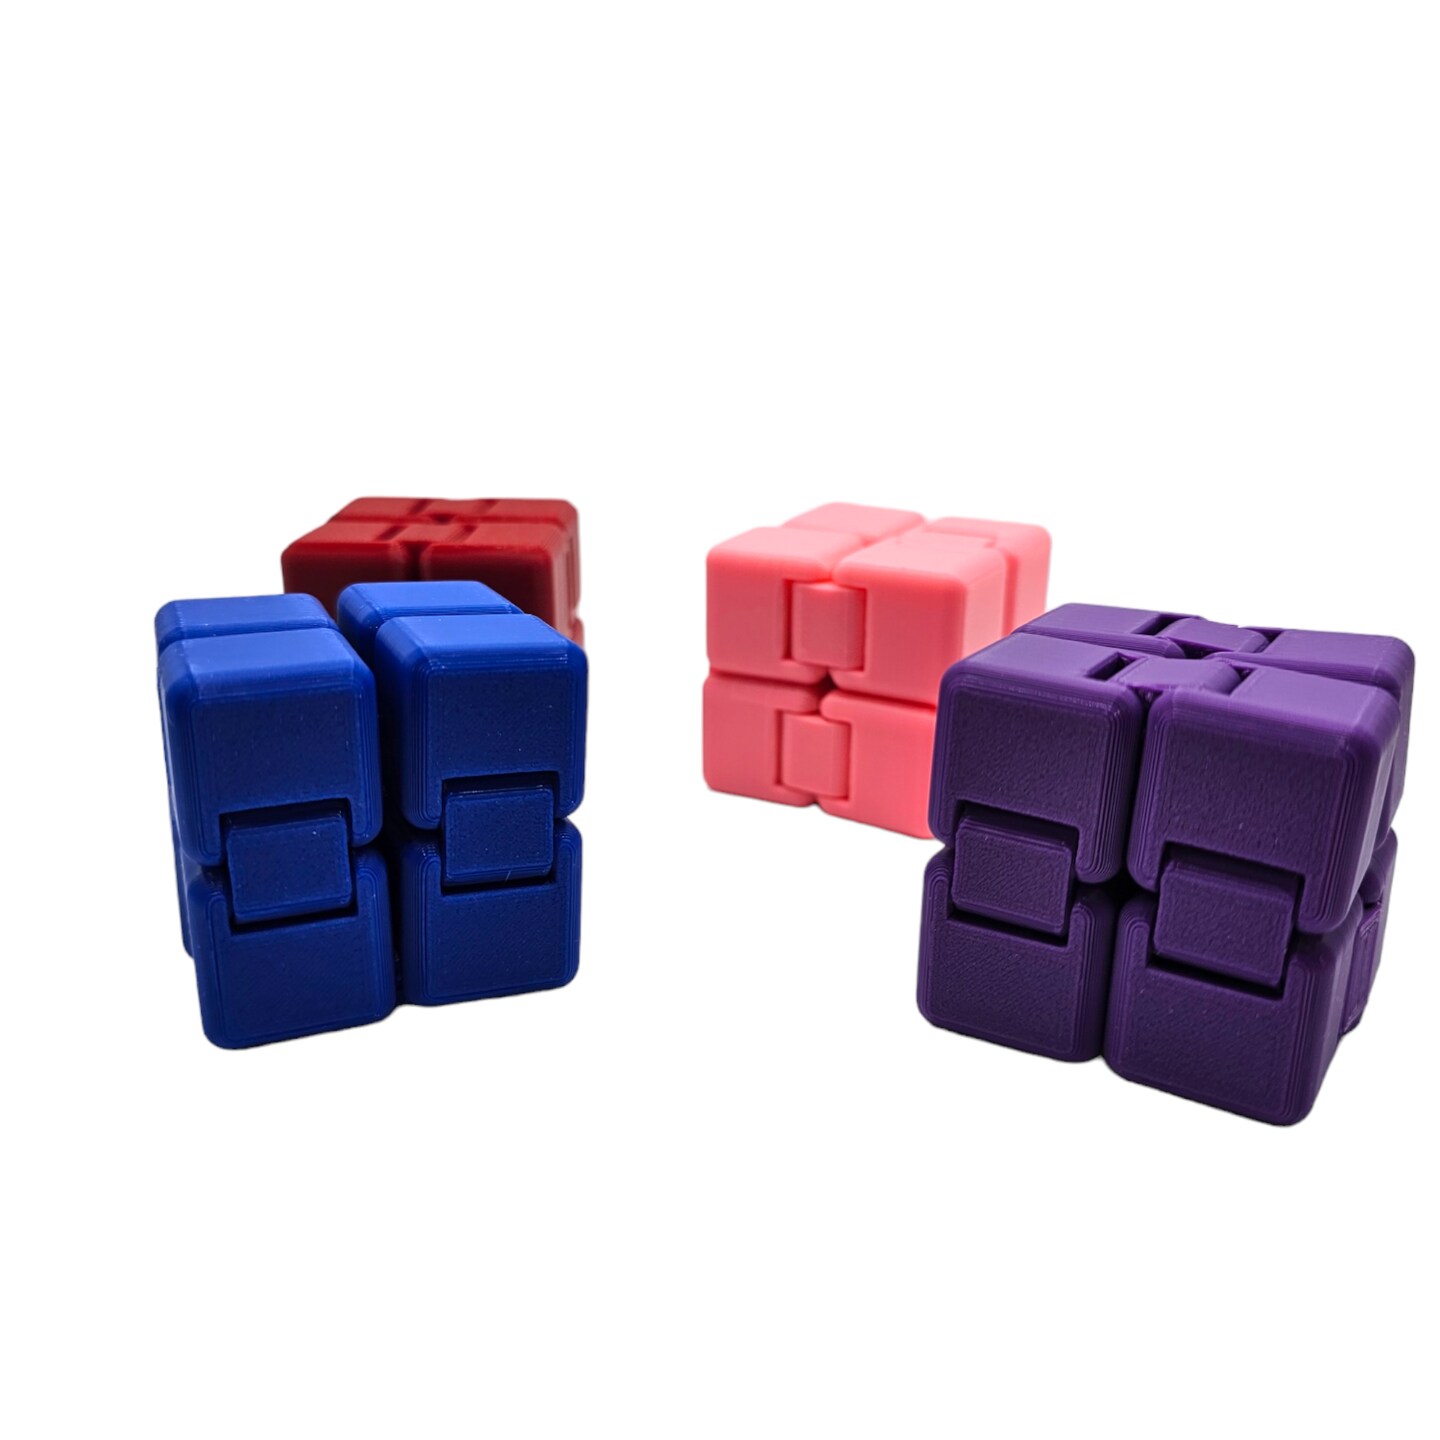 Weighted Infinity Fidget Cube, 3D Printed Weighted Fidget Cube, Stress  Relief Toy, 3D Fidget Cube, Perfect Party Favor, Anxiety Relief Aid